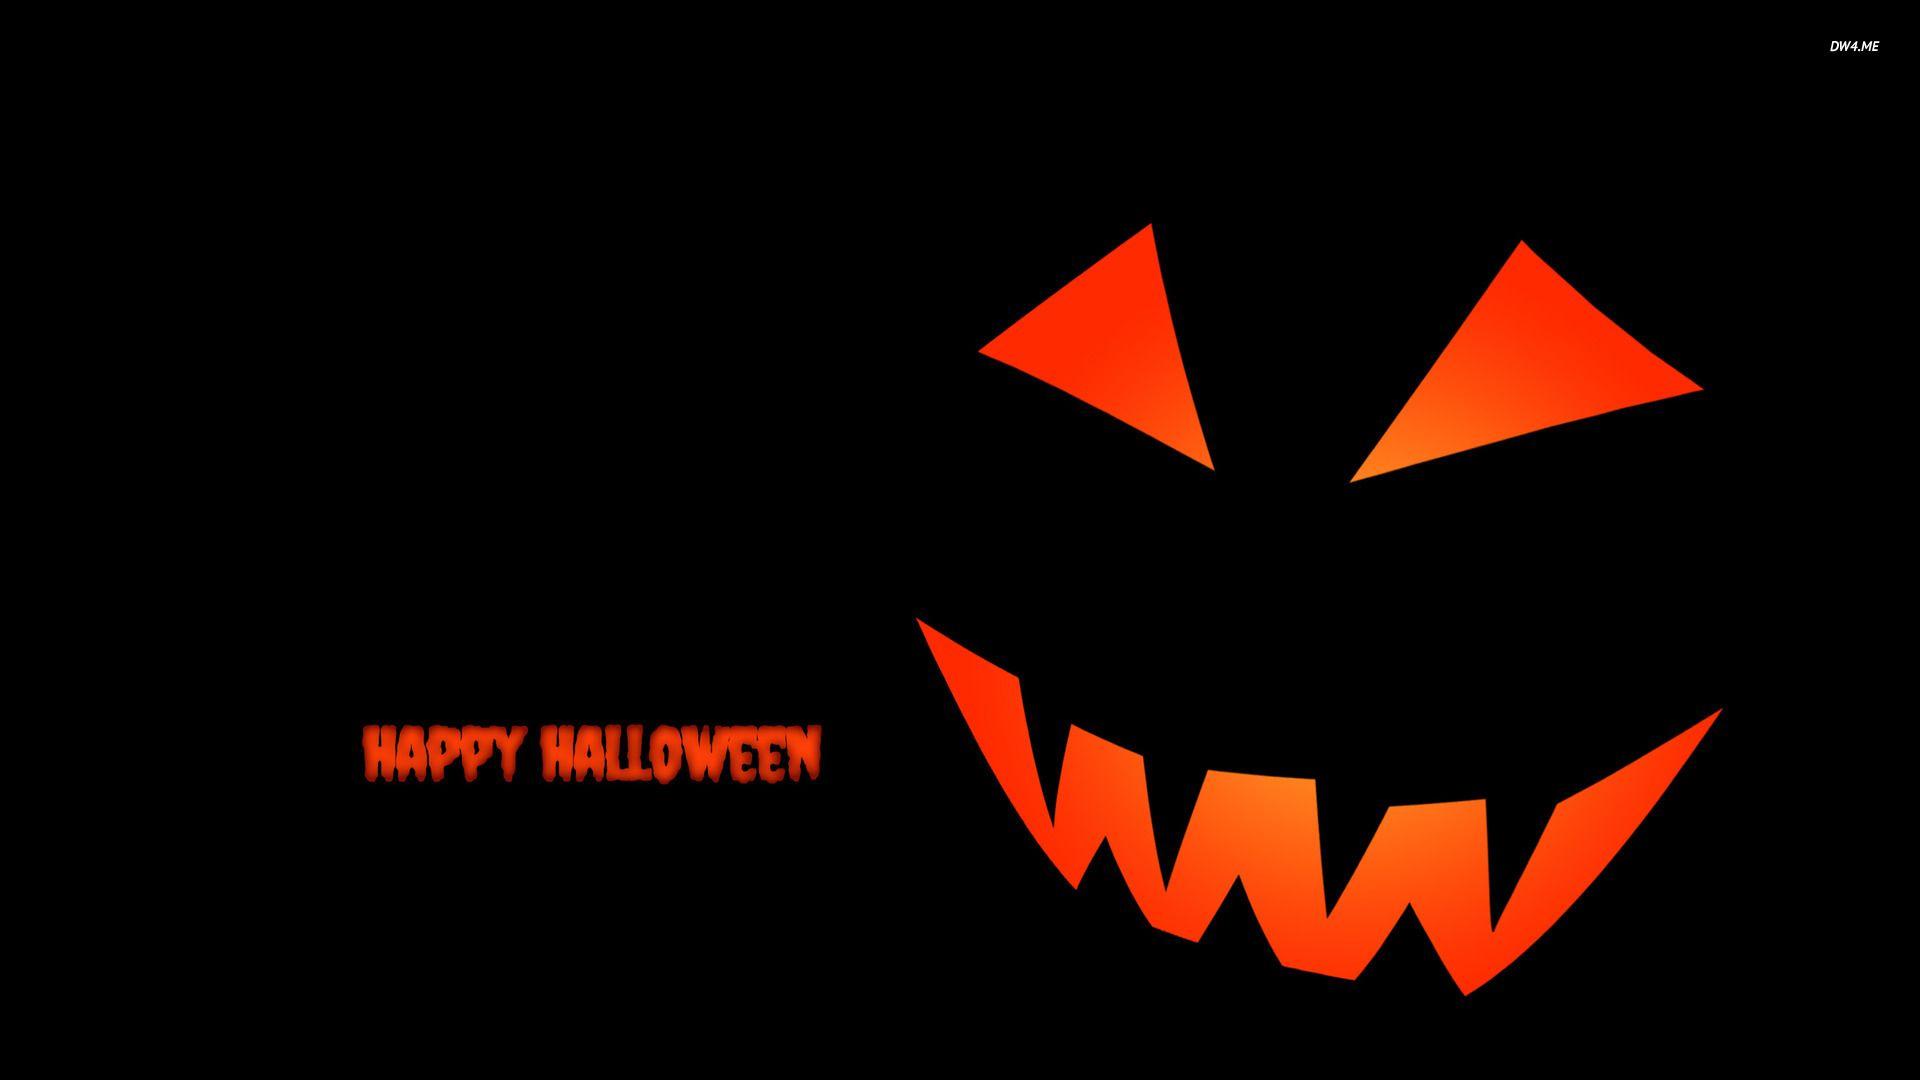 Happy halloween Image HD wallpaper 2016 Beautiful and scary